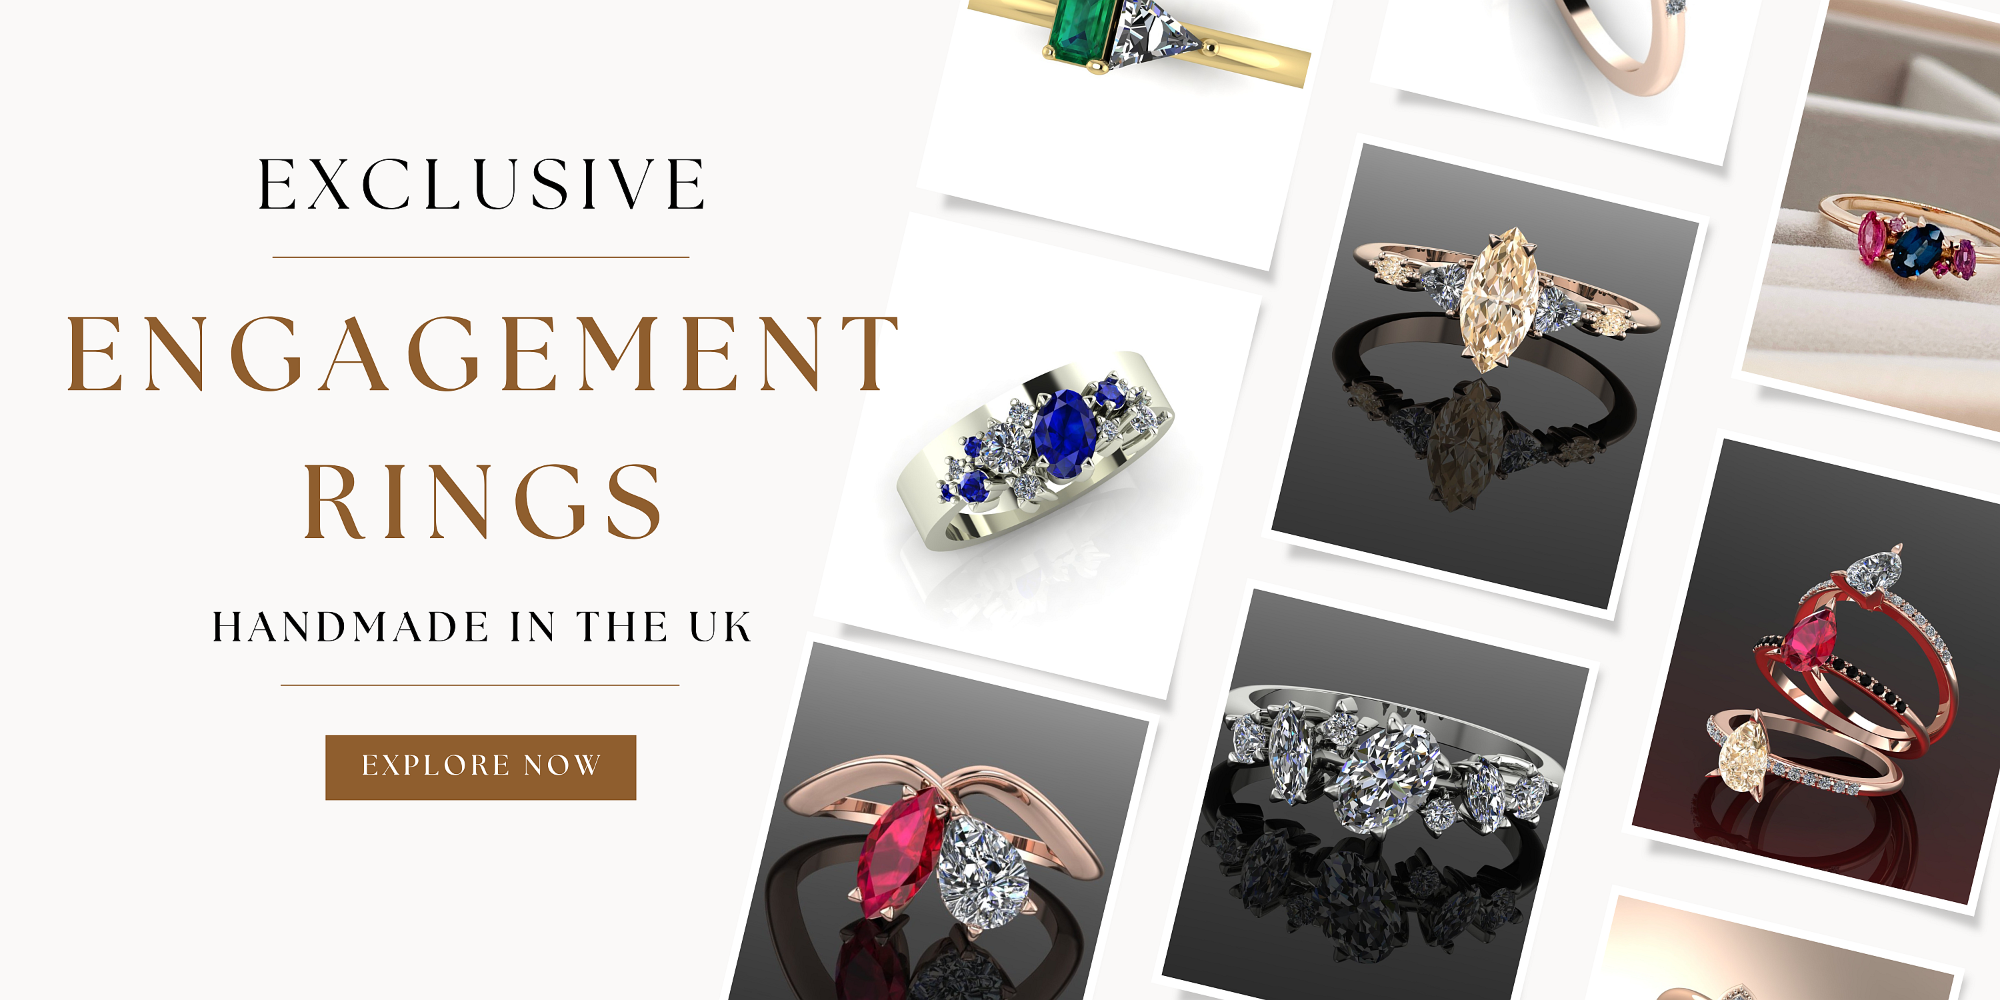 Shop our unique and exclusive engagement rings